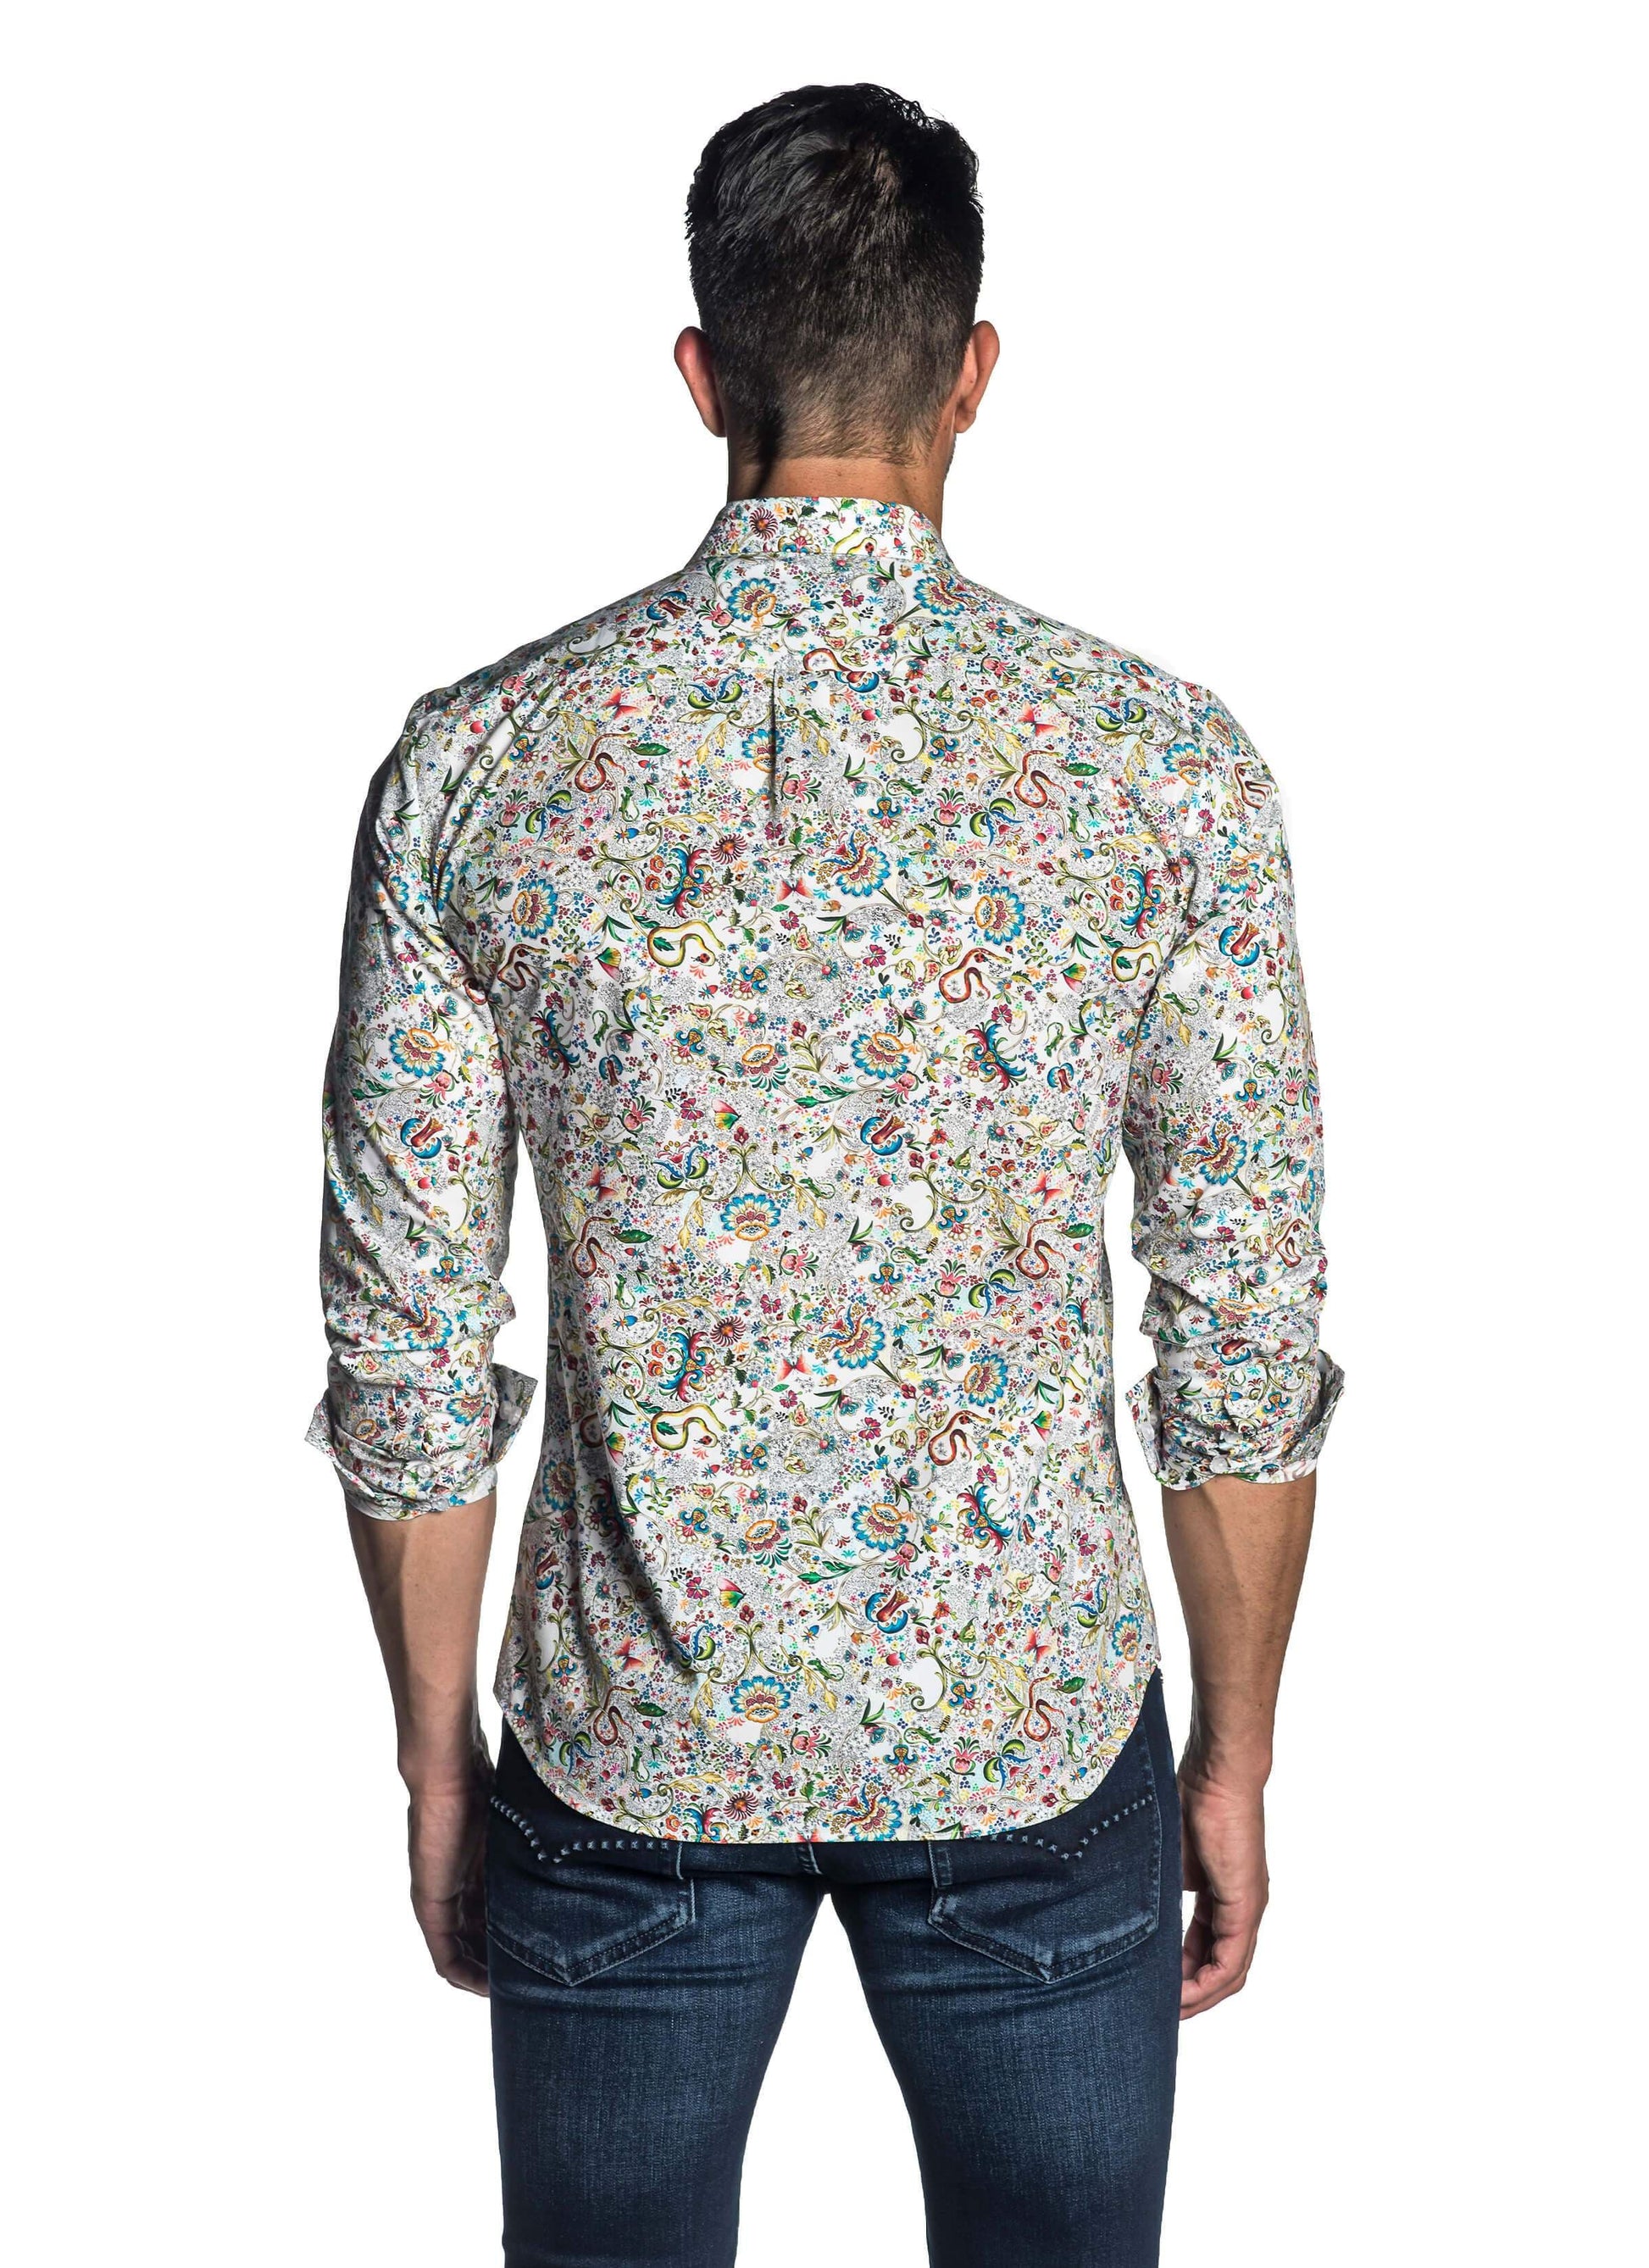 White and Multicolor Floral Degrade Printed Shirt AH-T-7063 - Back - Jared Lang